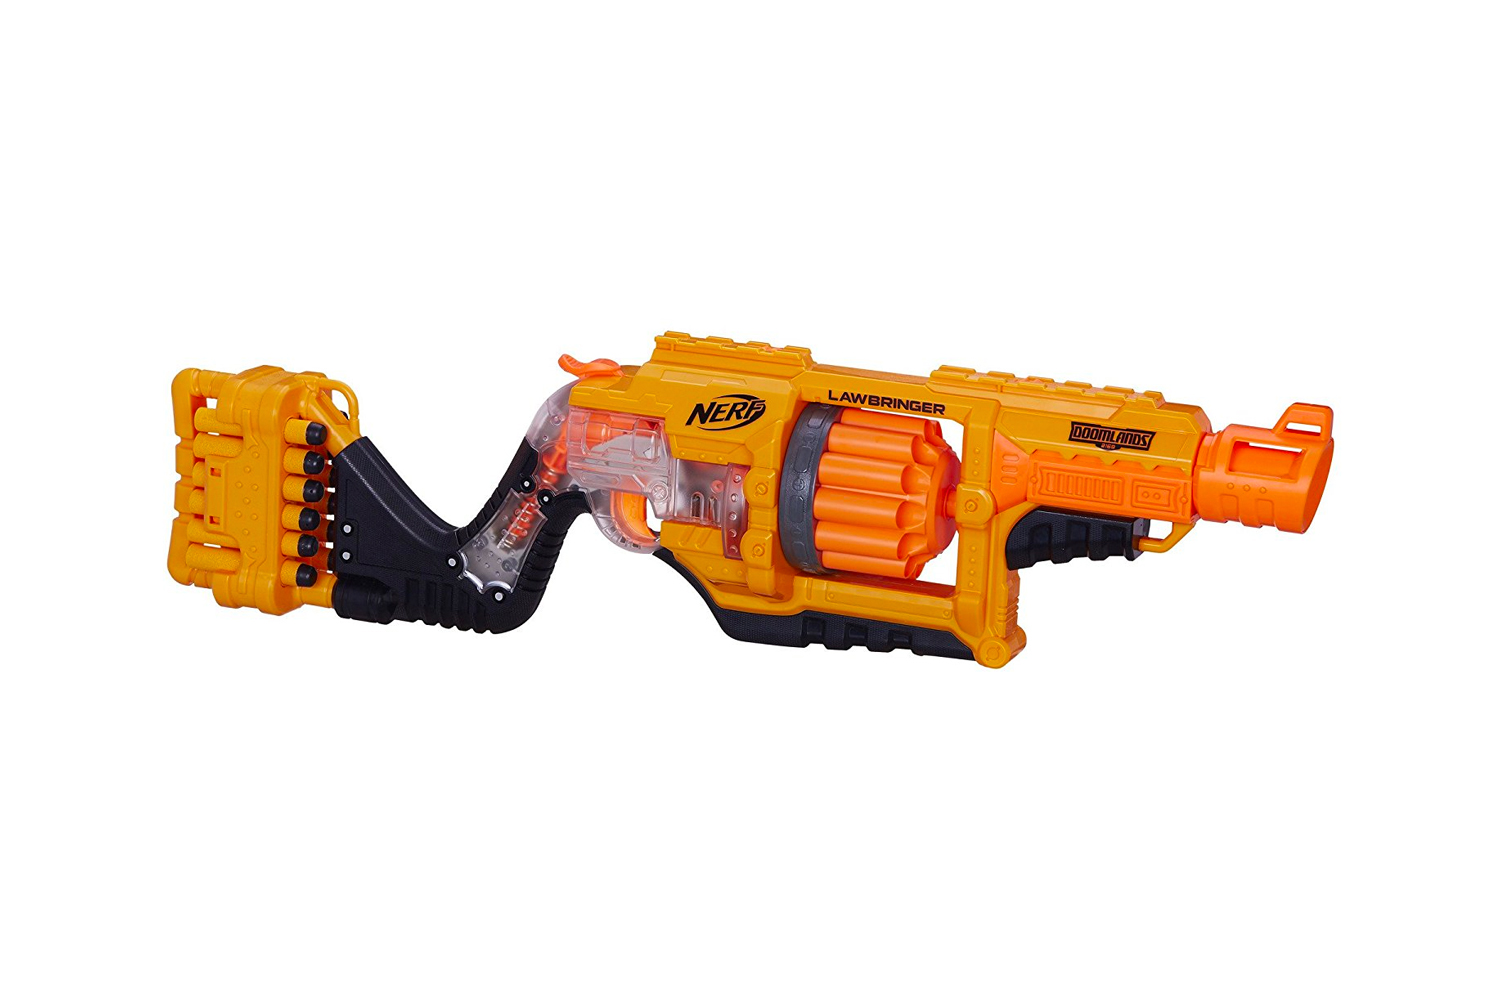 Added a LOT of speed to the Nerf Ultra Speed. 9.6v is way better